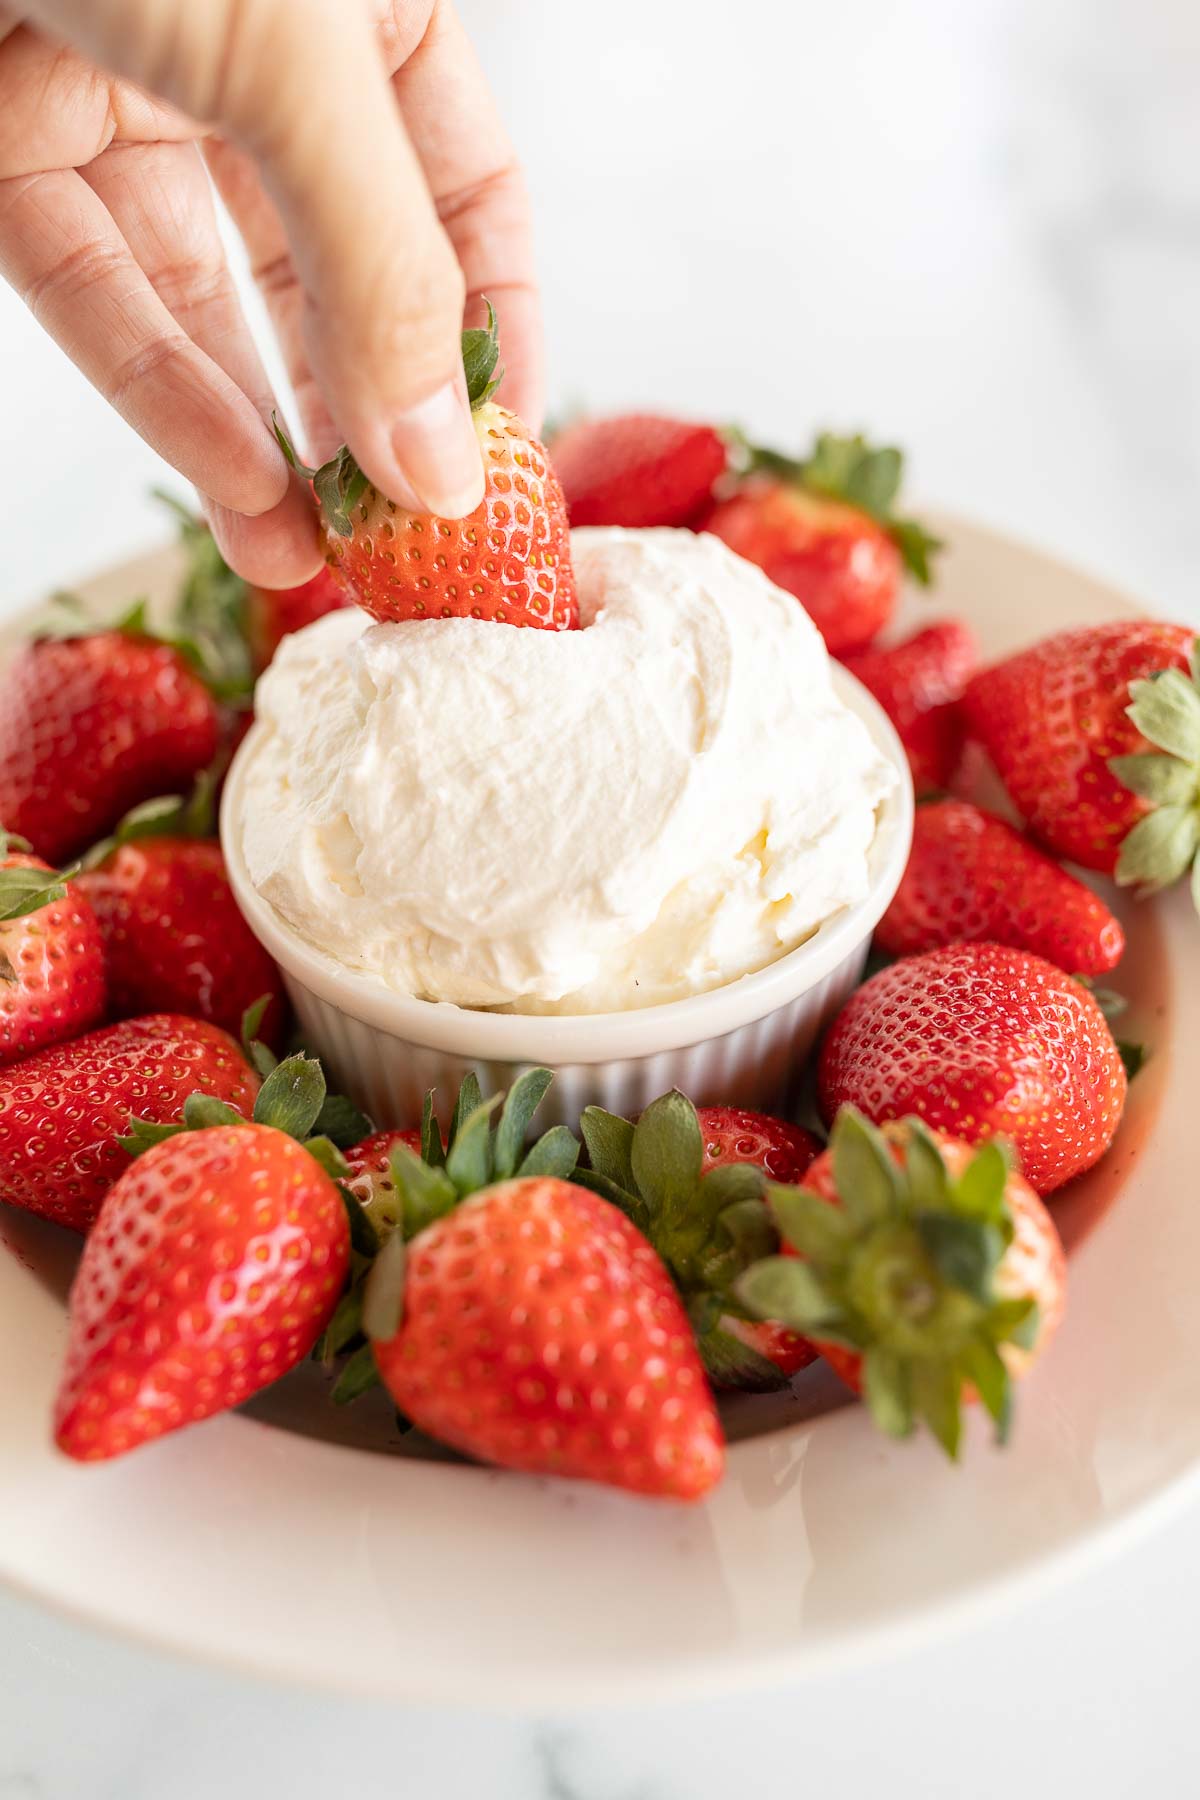 A plate of strawberries surrounding a bowl of fruit dip, a hand dips a strawberry into the dip.